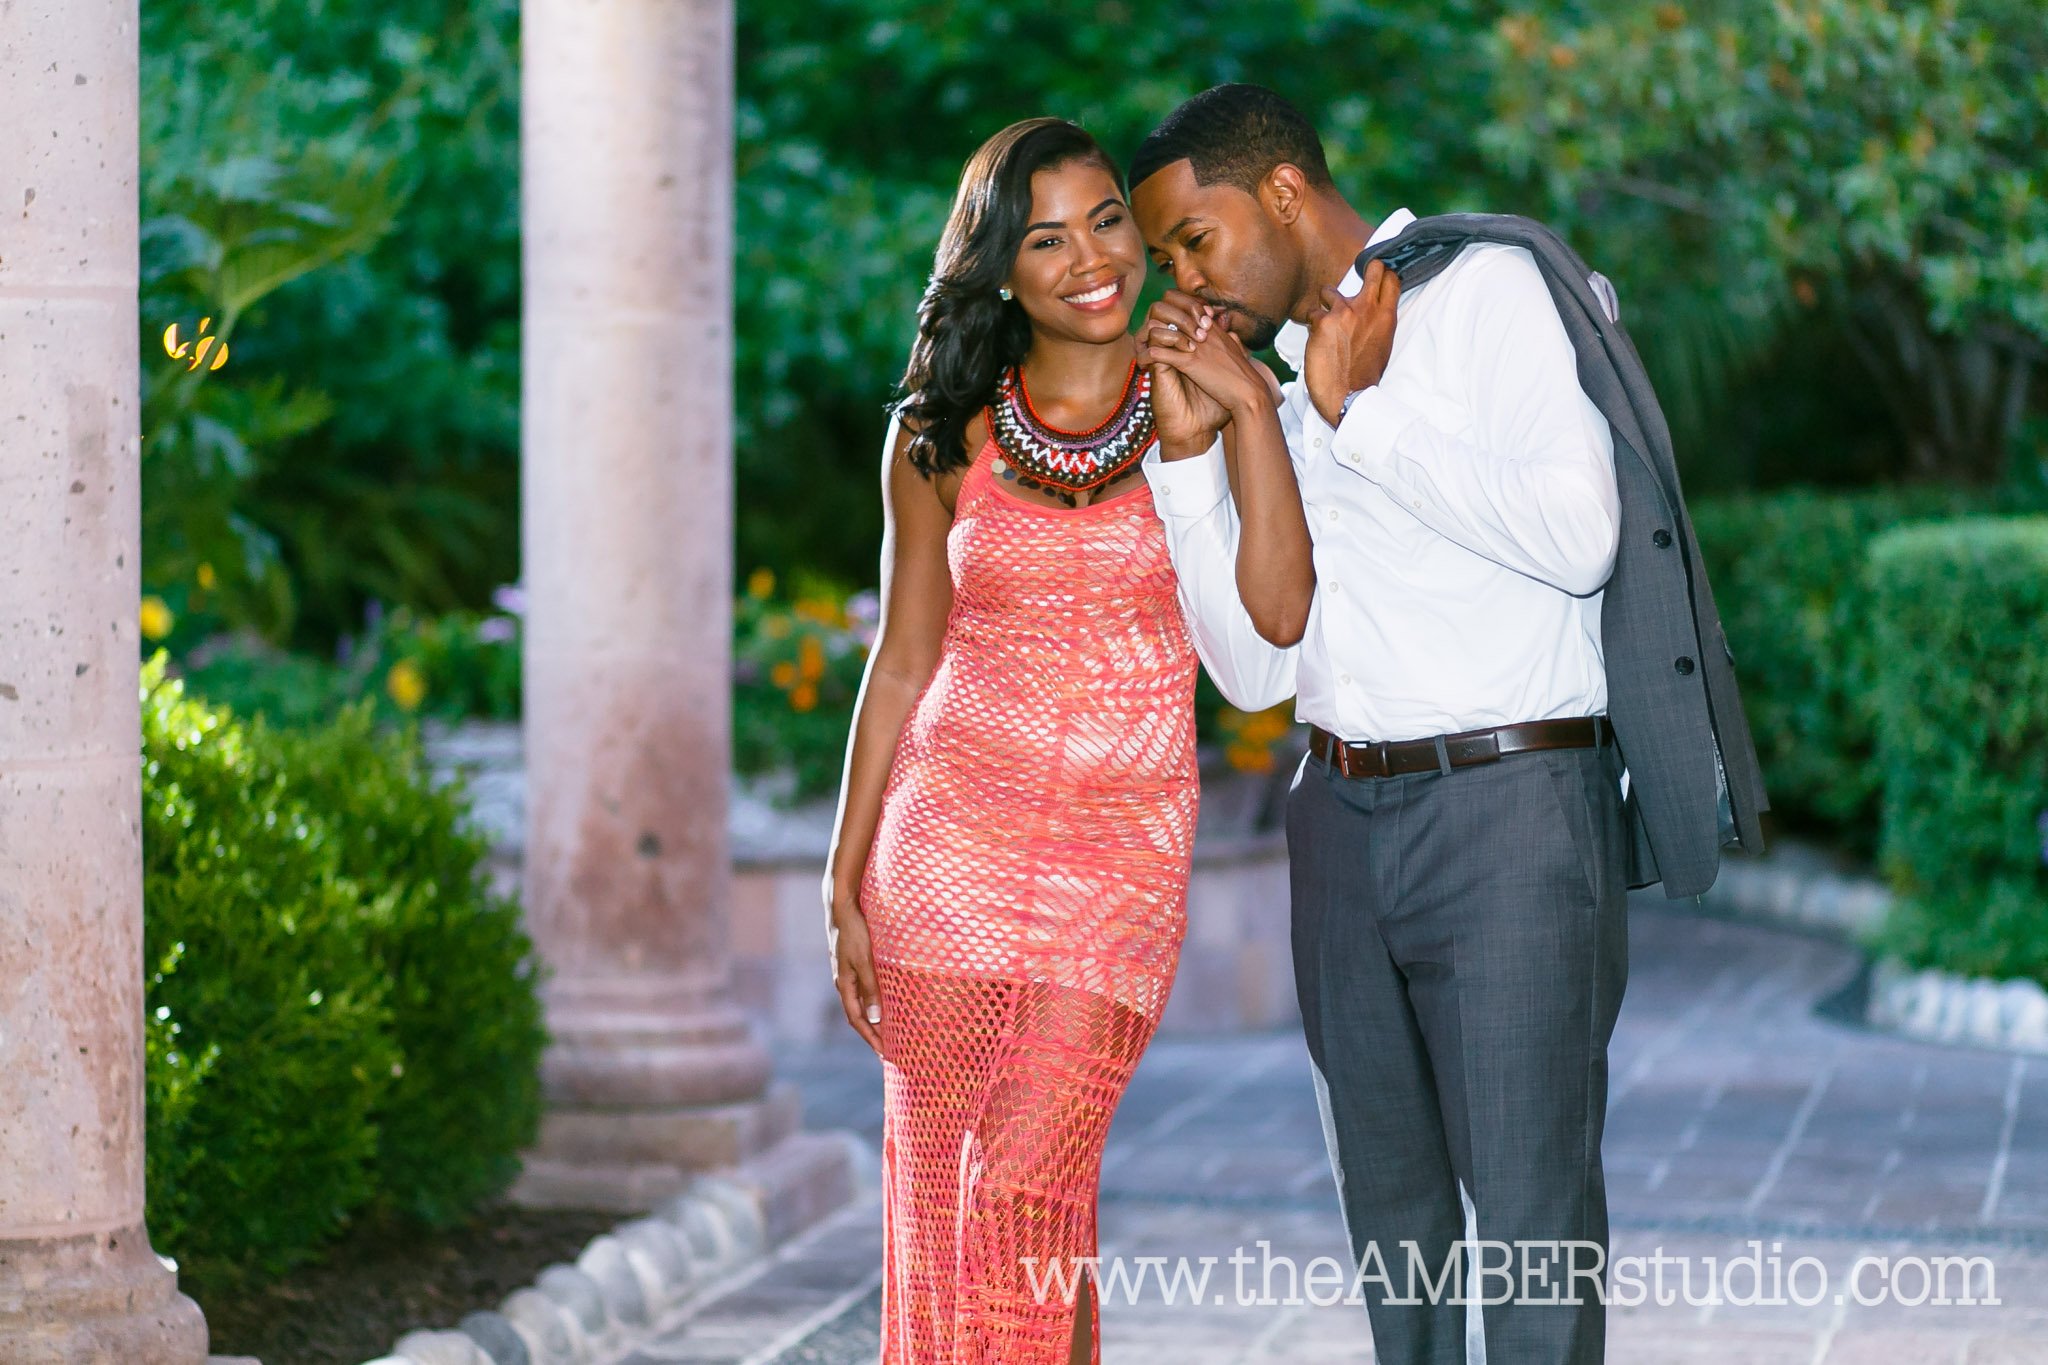 black-wedding-photographer-dallas-texas-engagement-photos-amber-knowles-studio-fort-worth-botanical-gardens-red-dress-suit-african-american-couple-cc0015